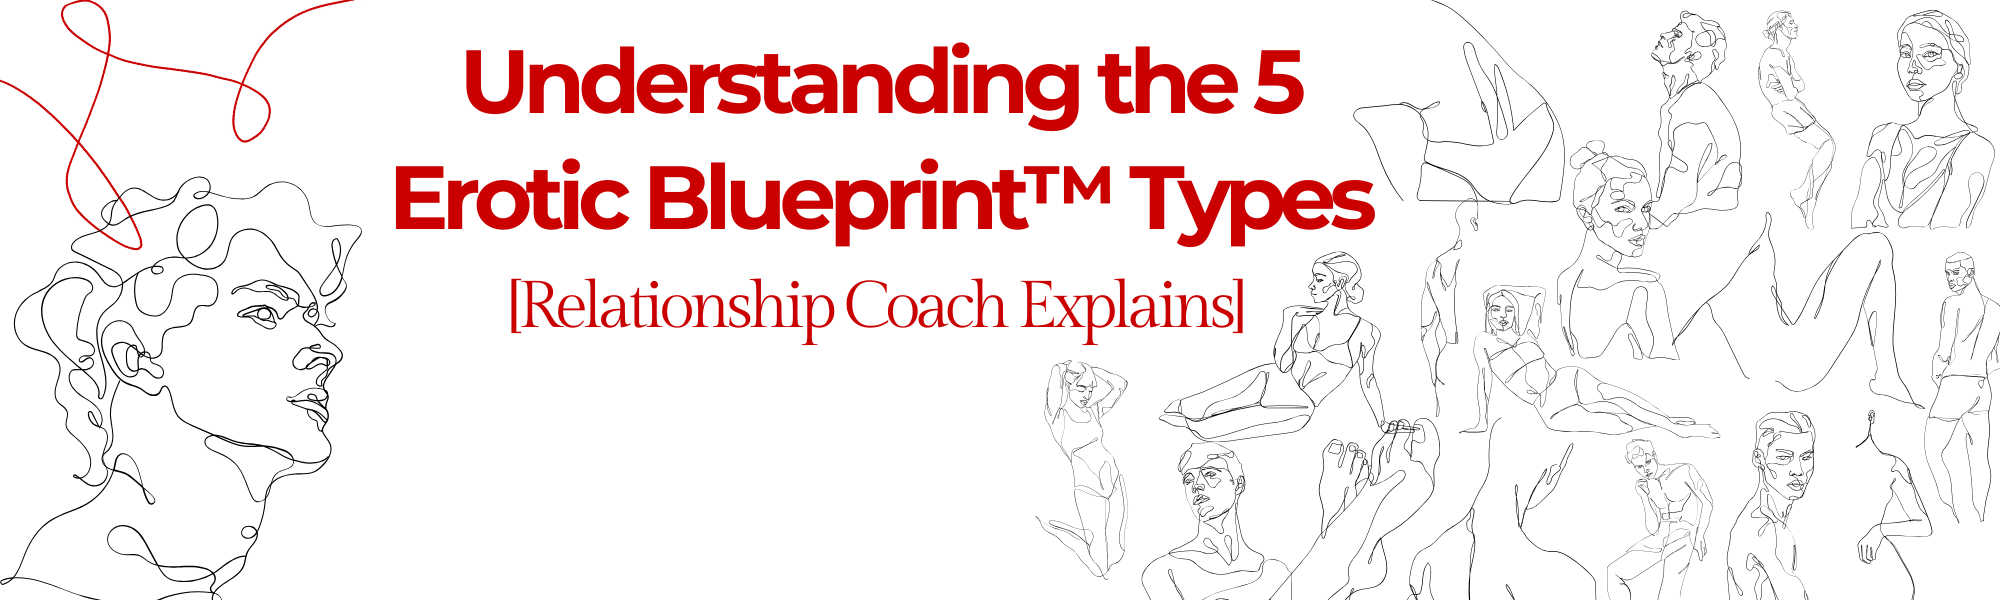 Line art of scantily dressed people. Red text says “Understanding the 5 Erotic Blueprint Types [Relationship Coach Explains]”